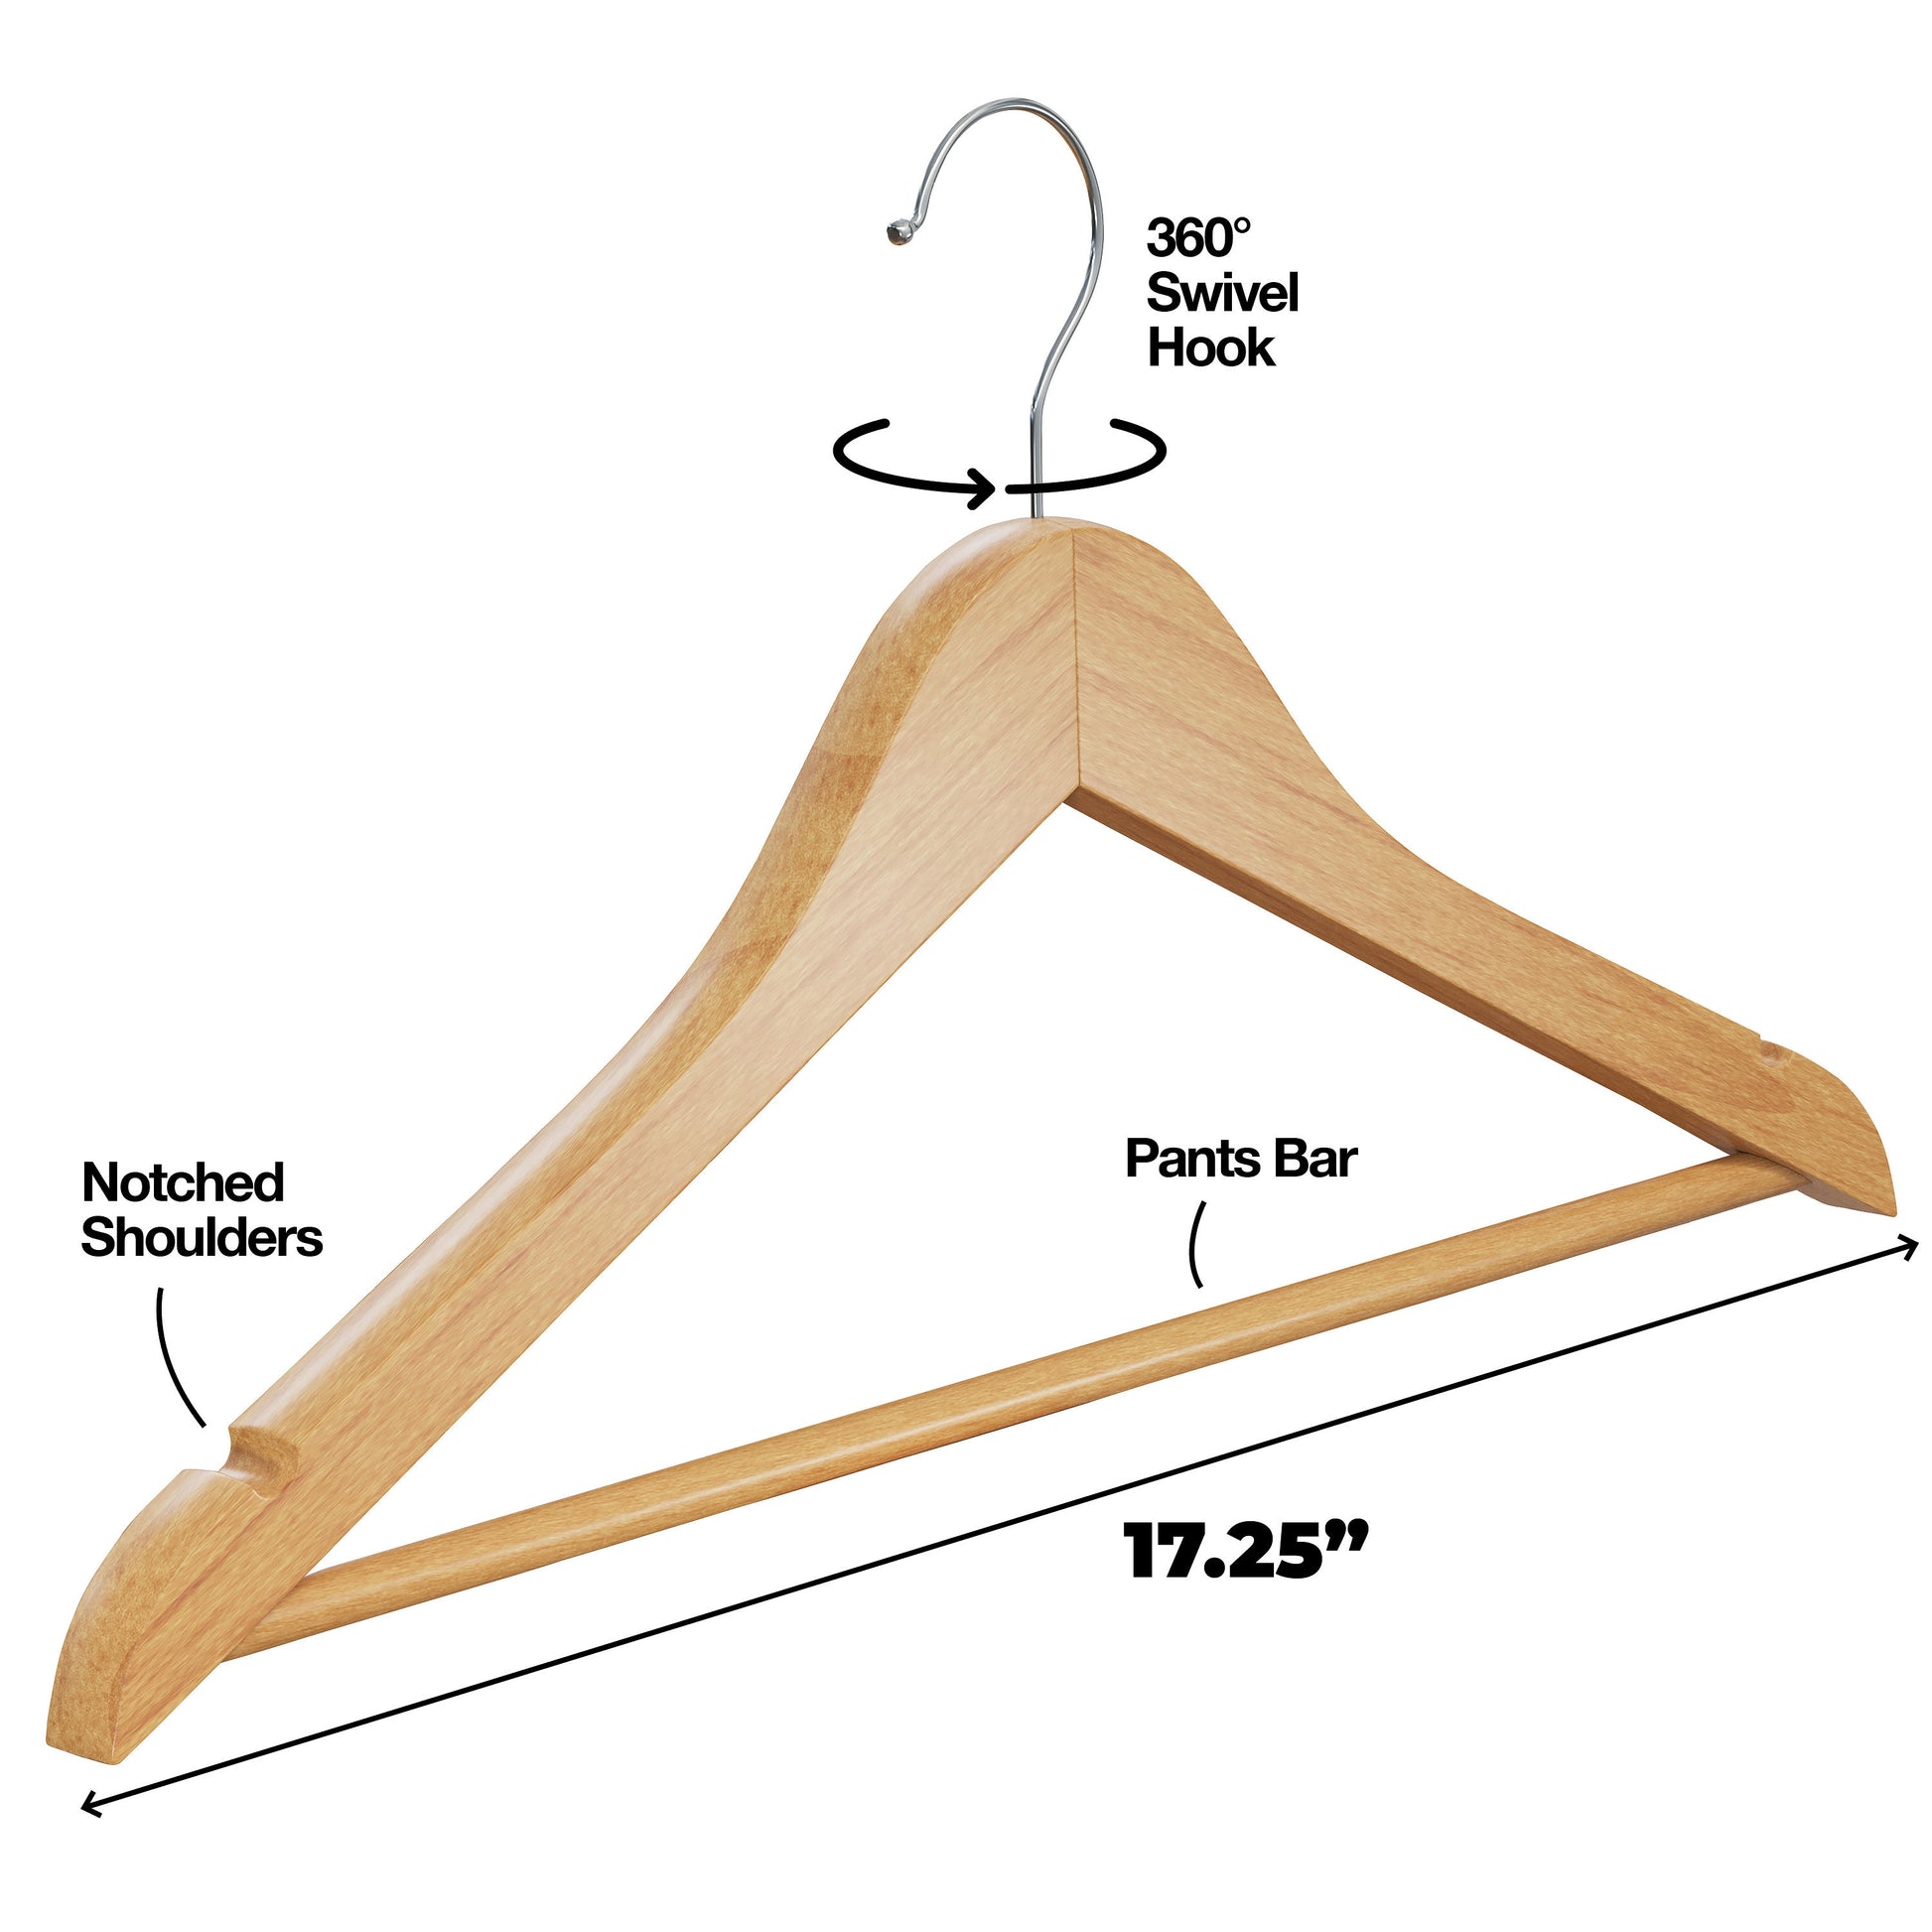 Style Selections Wood hanger 10-Pack Wood Clothing Hanger (Natural